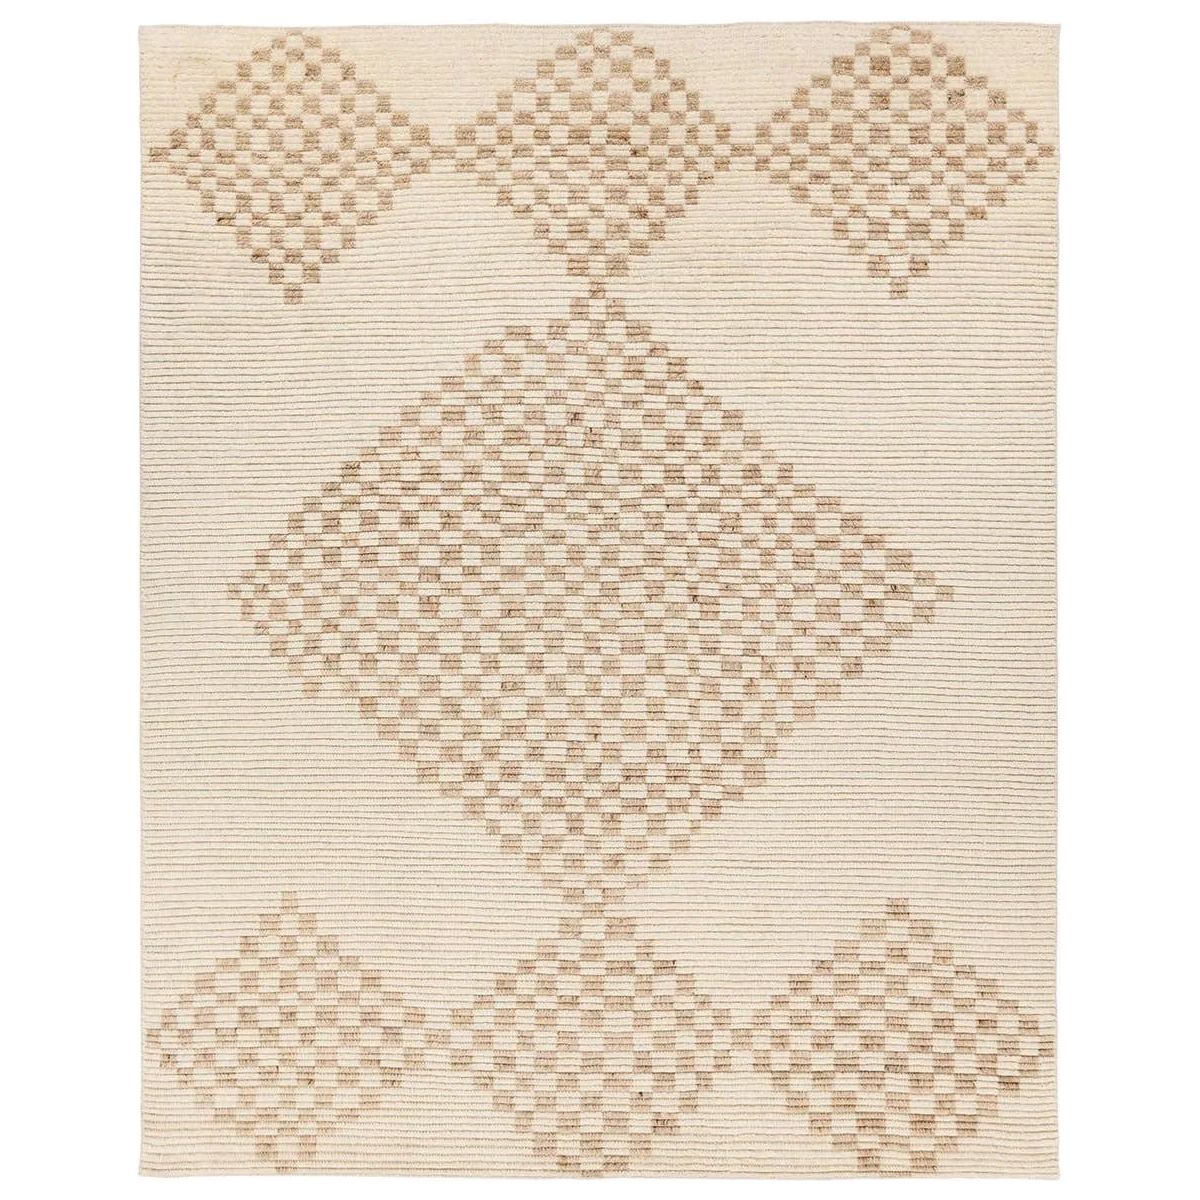 A stunning array of globally inspired designs in neutral tones define the handknotted Merzouga by Heja Home Sarenthia. The Moroccan-inspired Sarenthia design showcases several checkered diamonds in cream and taupe tones. The 100% wool pile is soft underfoot and inherently stain-resistant. Amethyst Home provides interior design, new home construction design consulting, vintage area rugs, and lighting in the Salt Lake City metro area.